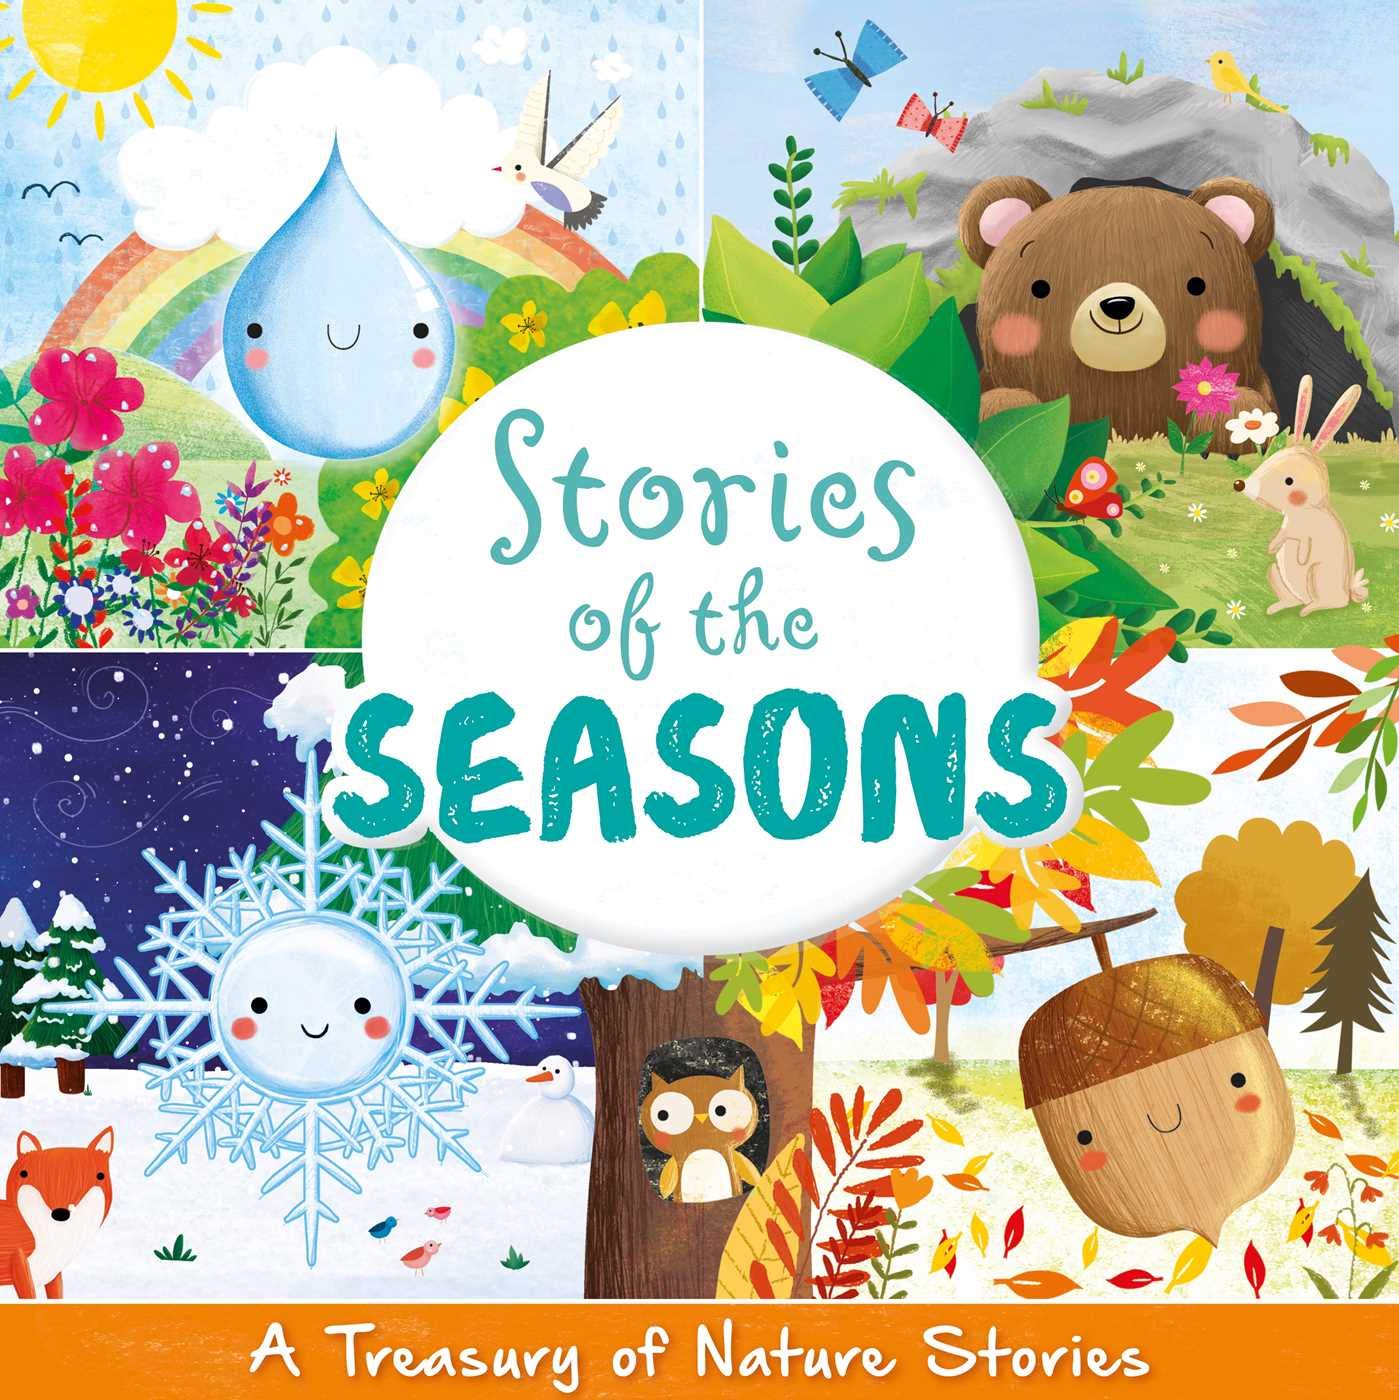 Stories of the seasons